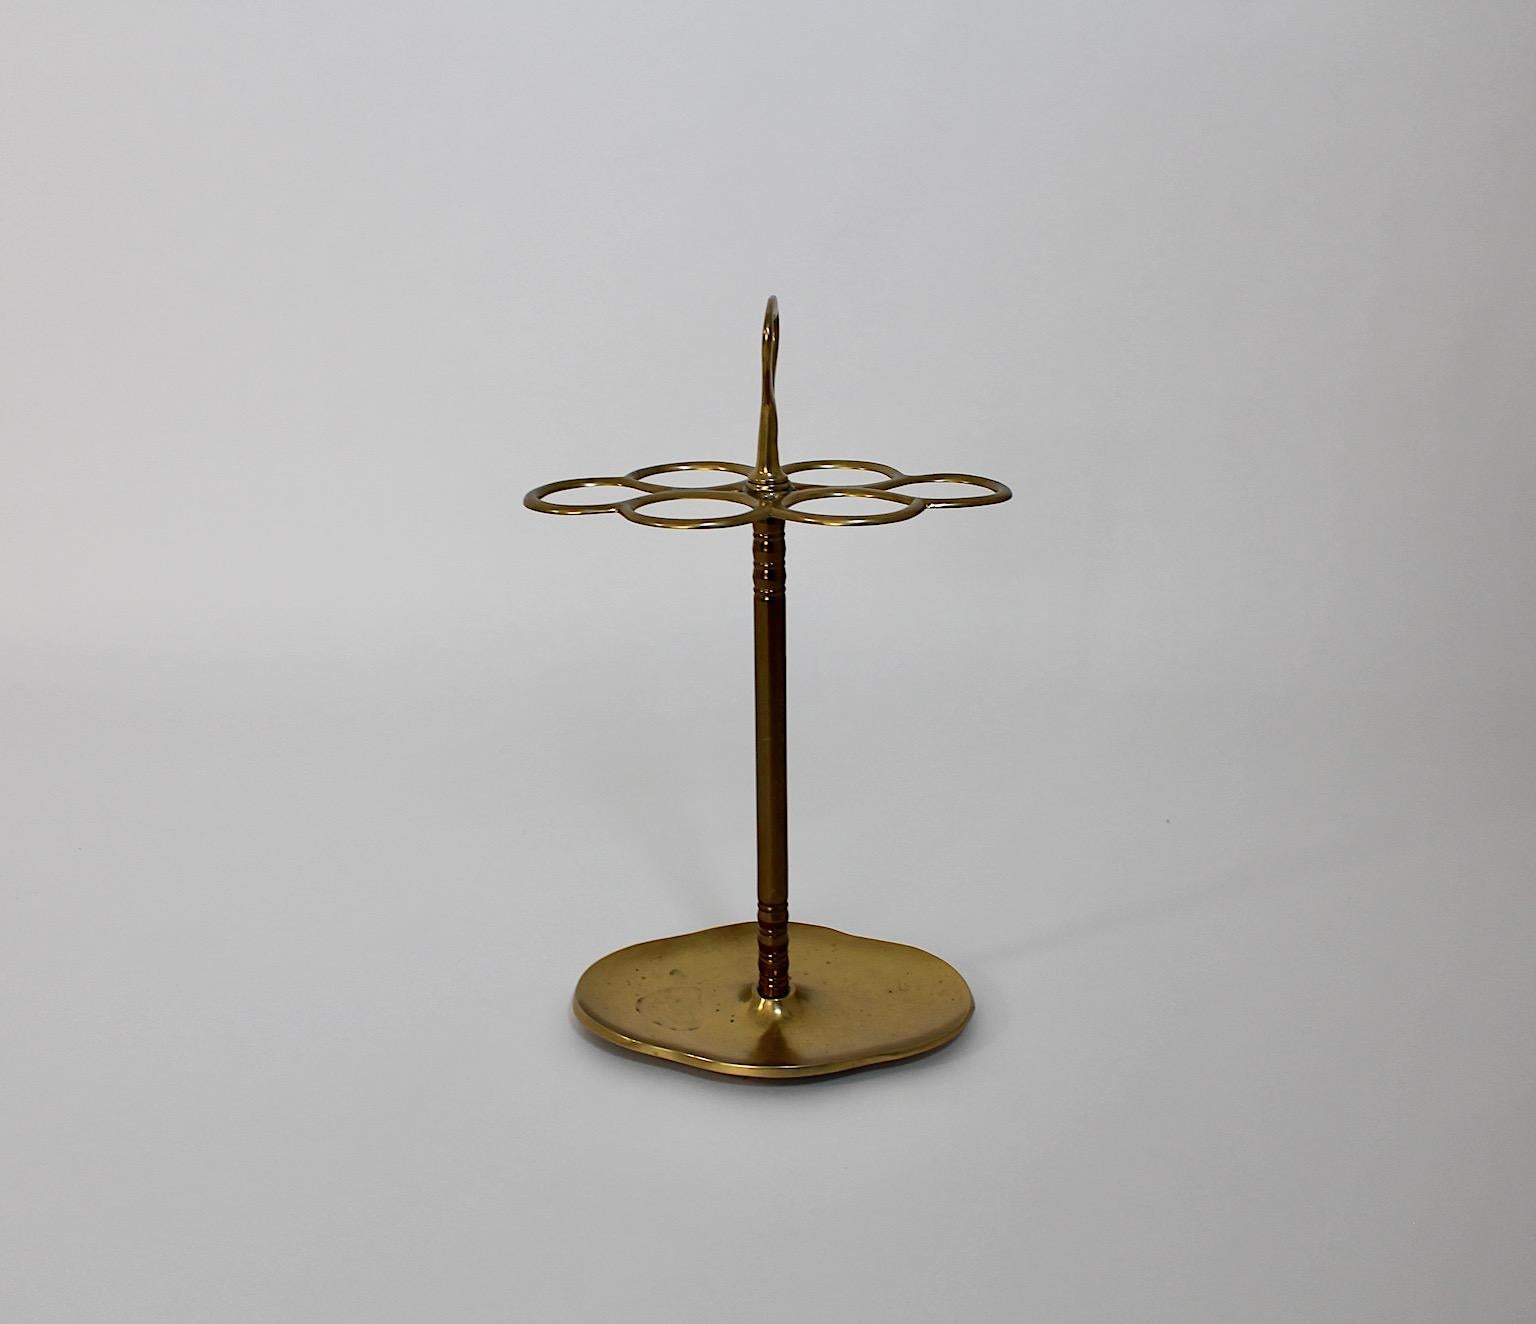 Hollywood Regency style vintage umbrella stand or cane holder from brass 1970s Italy.
A stunning umbrella stand with 6 compartments for umbrellas or canes from brass with a handle for an easy handling, While the brass body shows desirable patina and